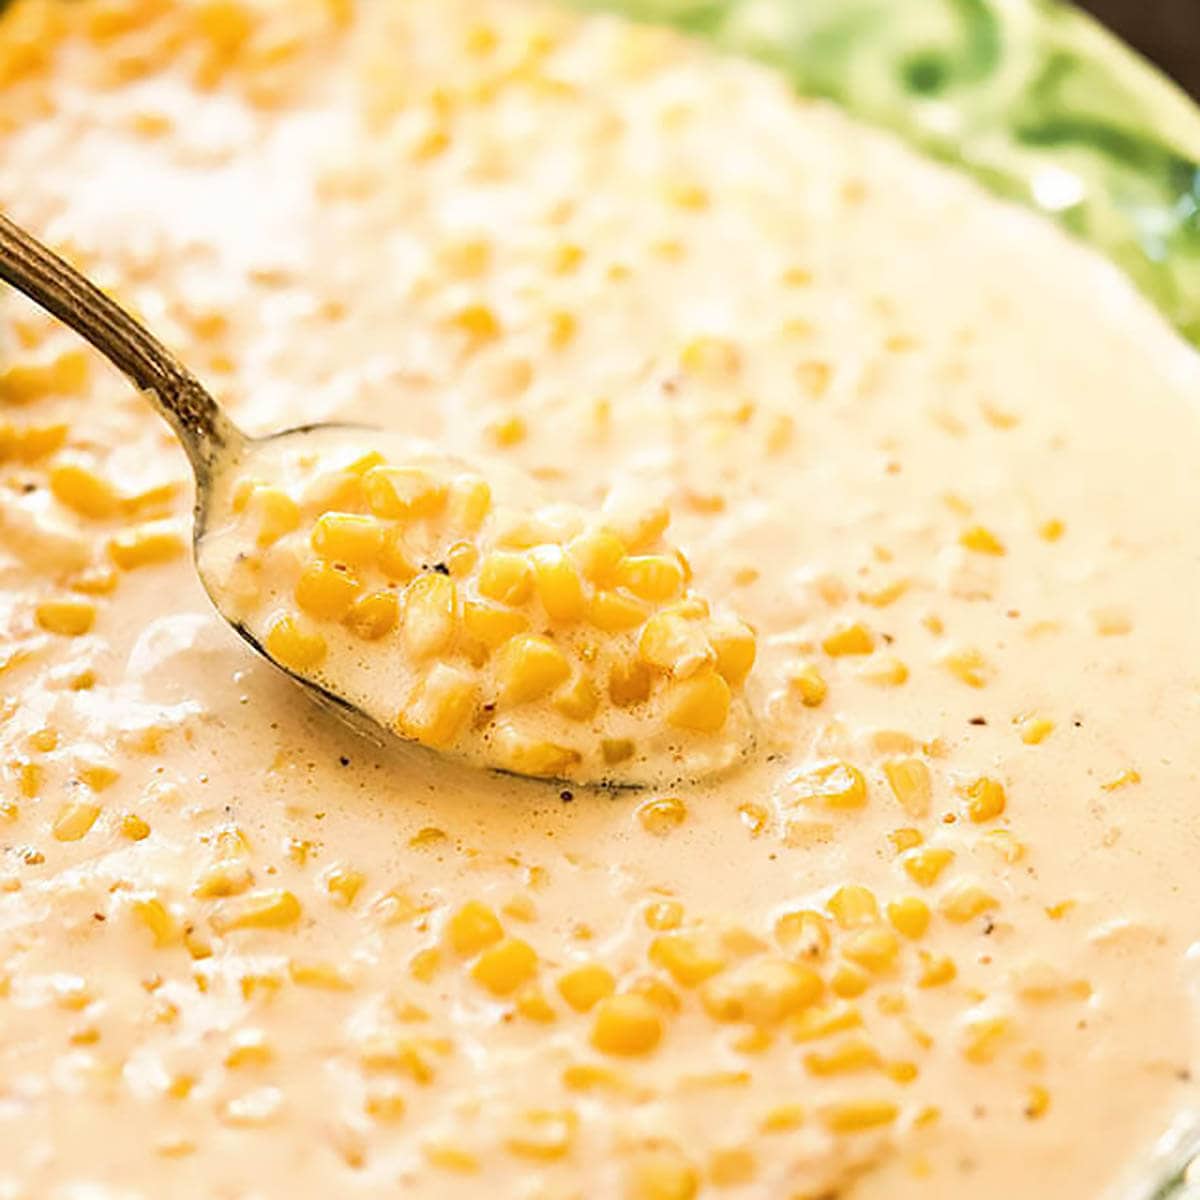 Creamed corn in serving bowl with spoon.